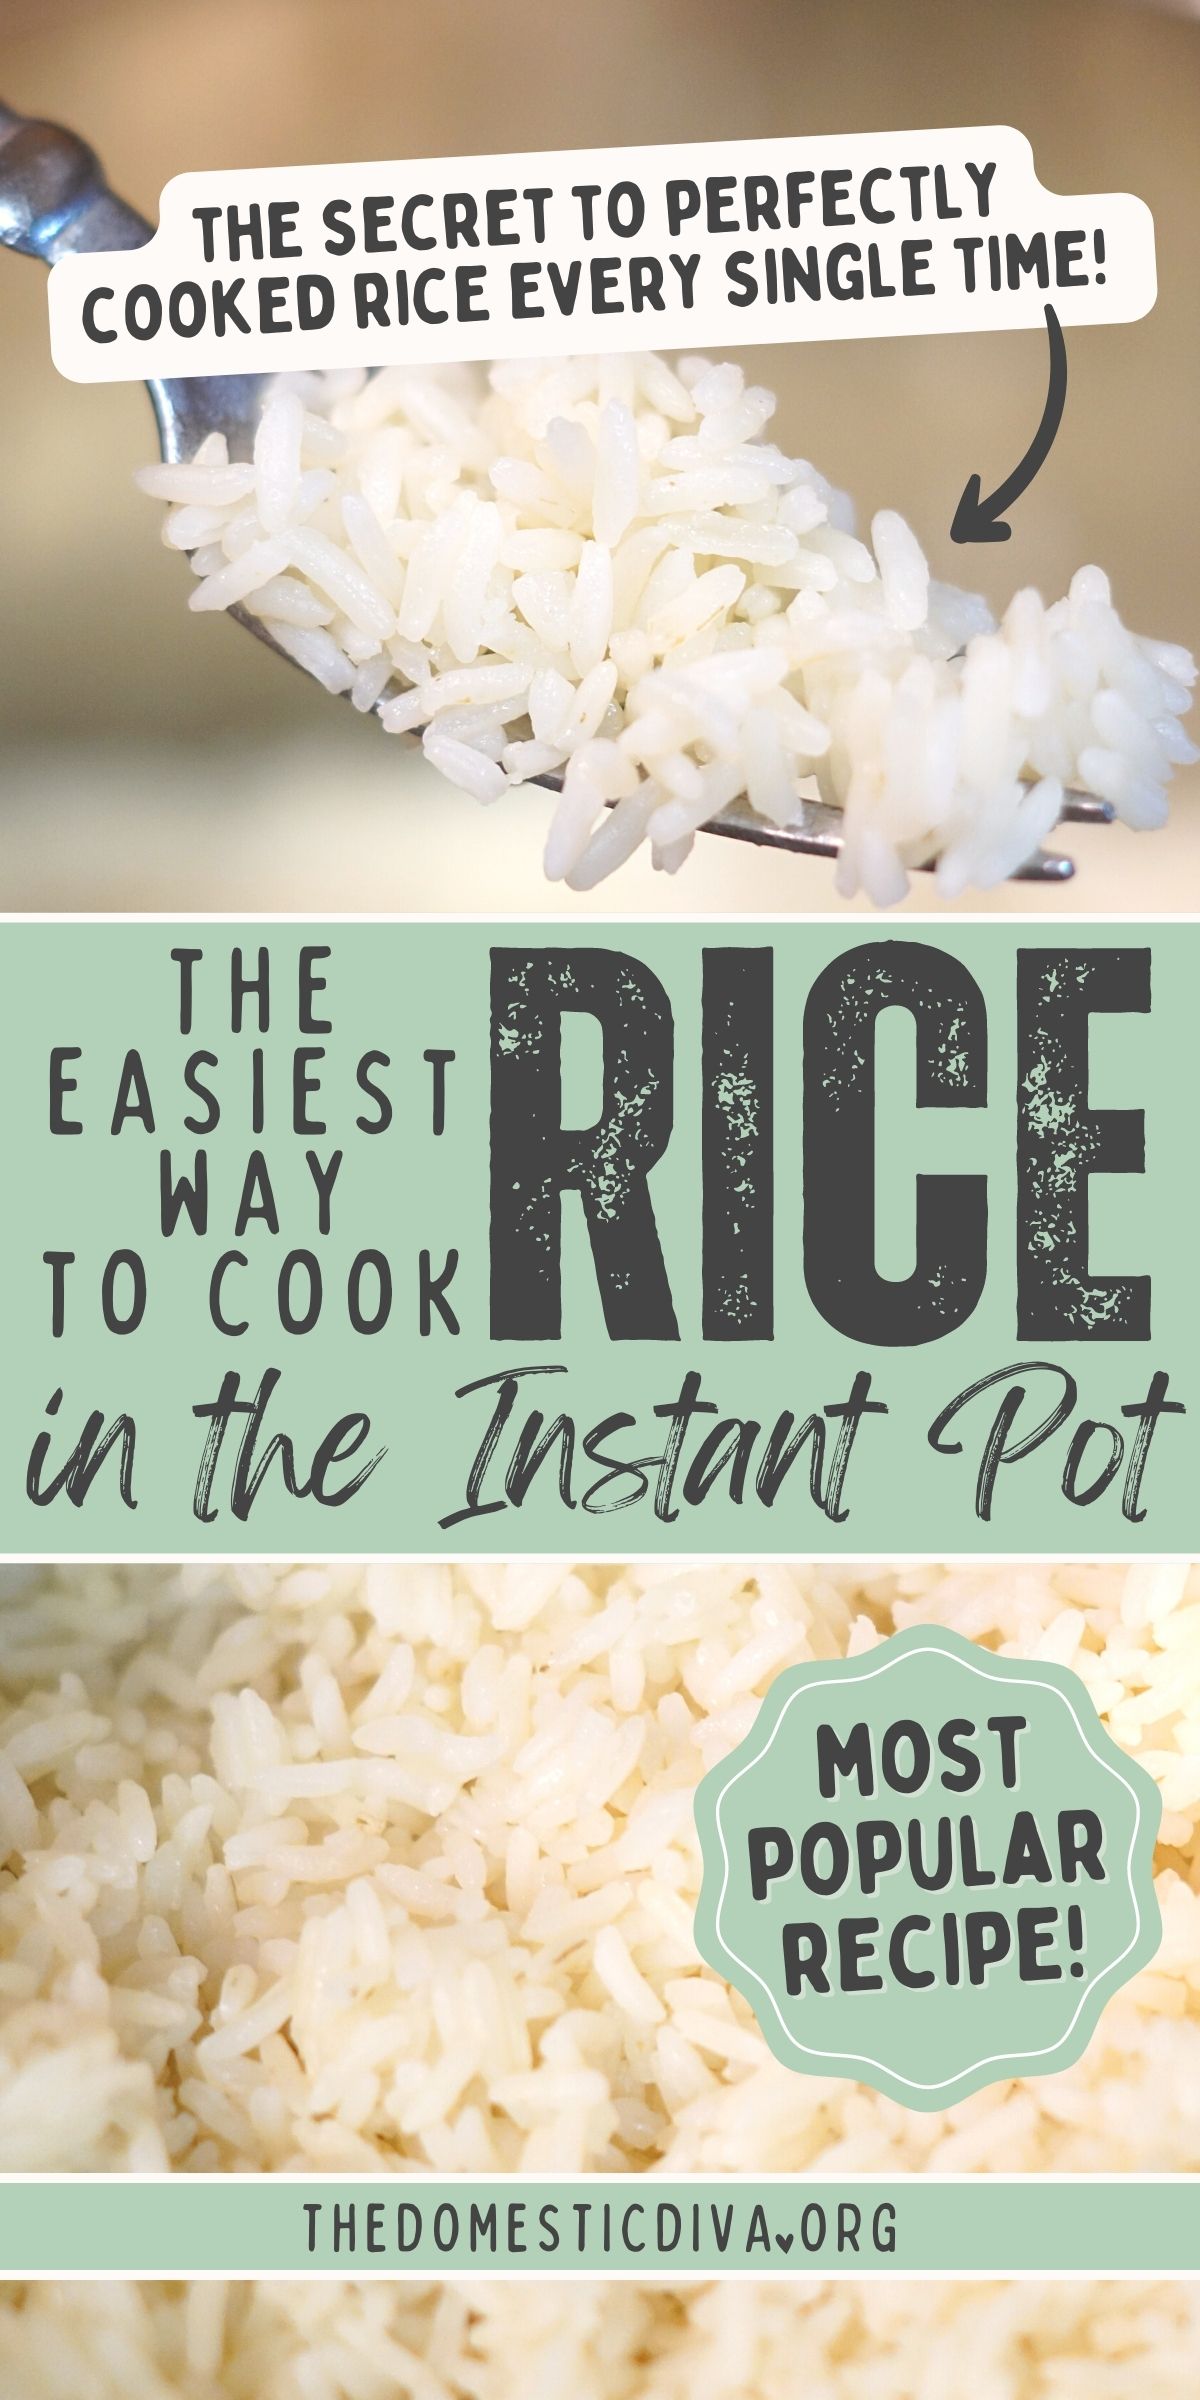 The Easy way to Cook Rice in the Instant Pot